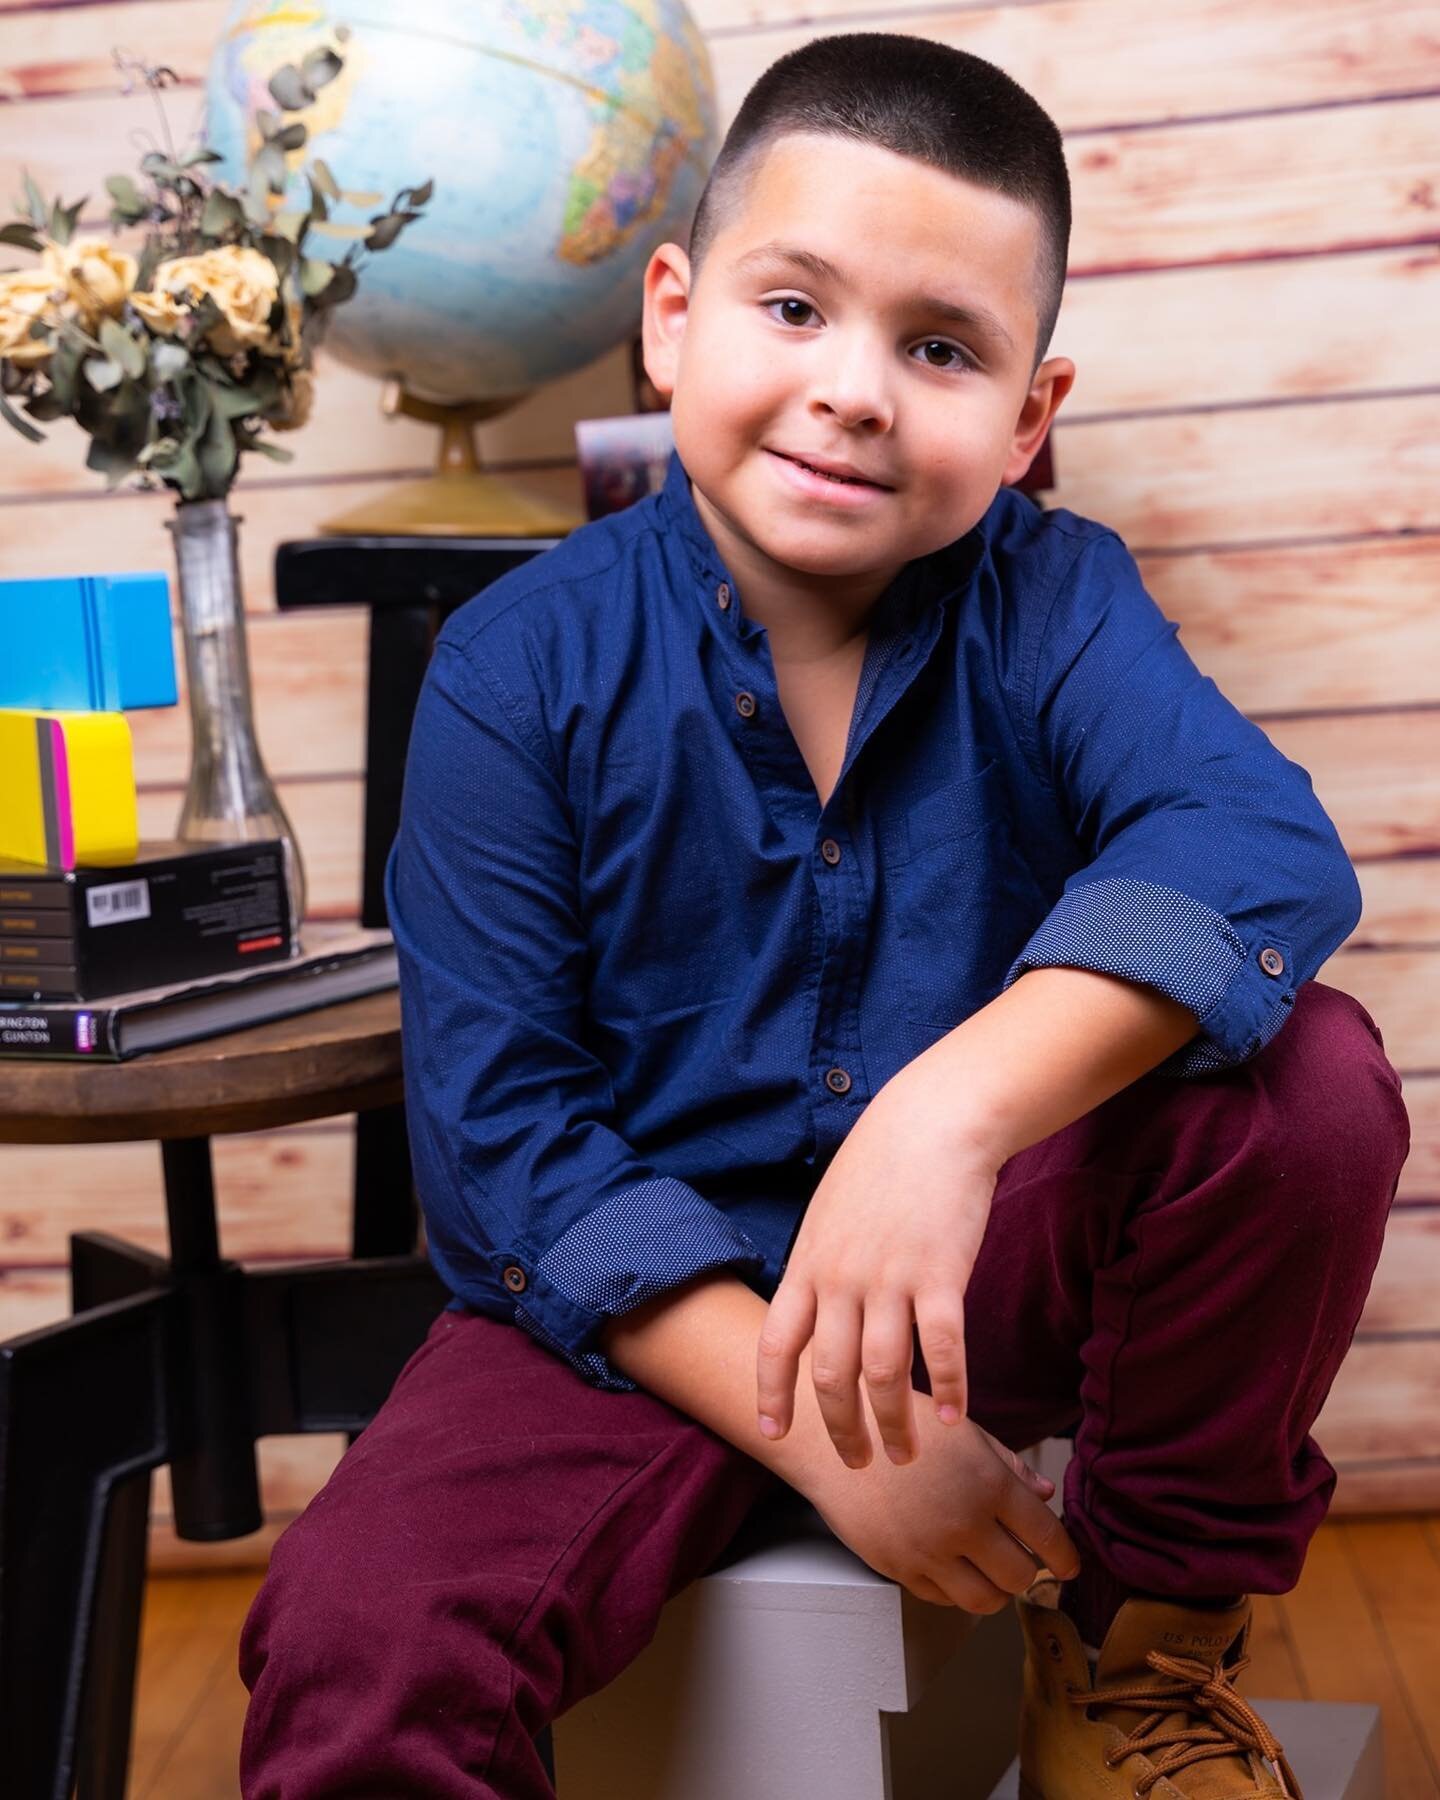 #model #handsome #thatsmile #backtoschool #backtoschooloutfit #chicago#chicagoland #photography #portraitphotography